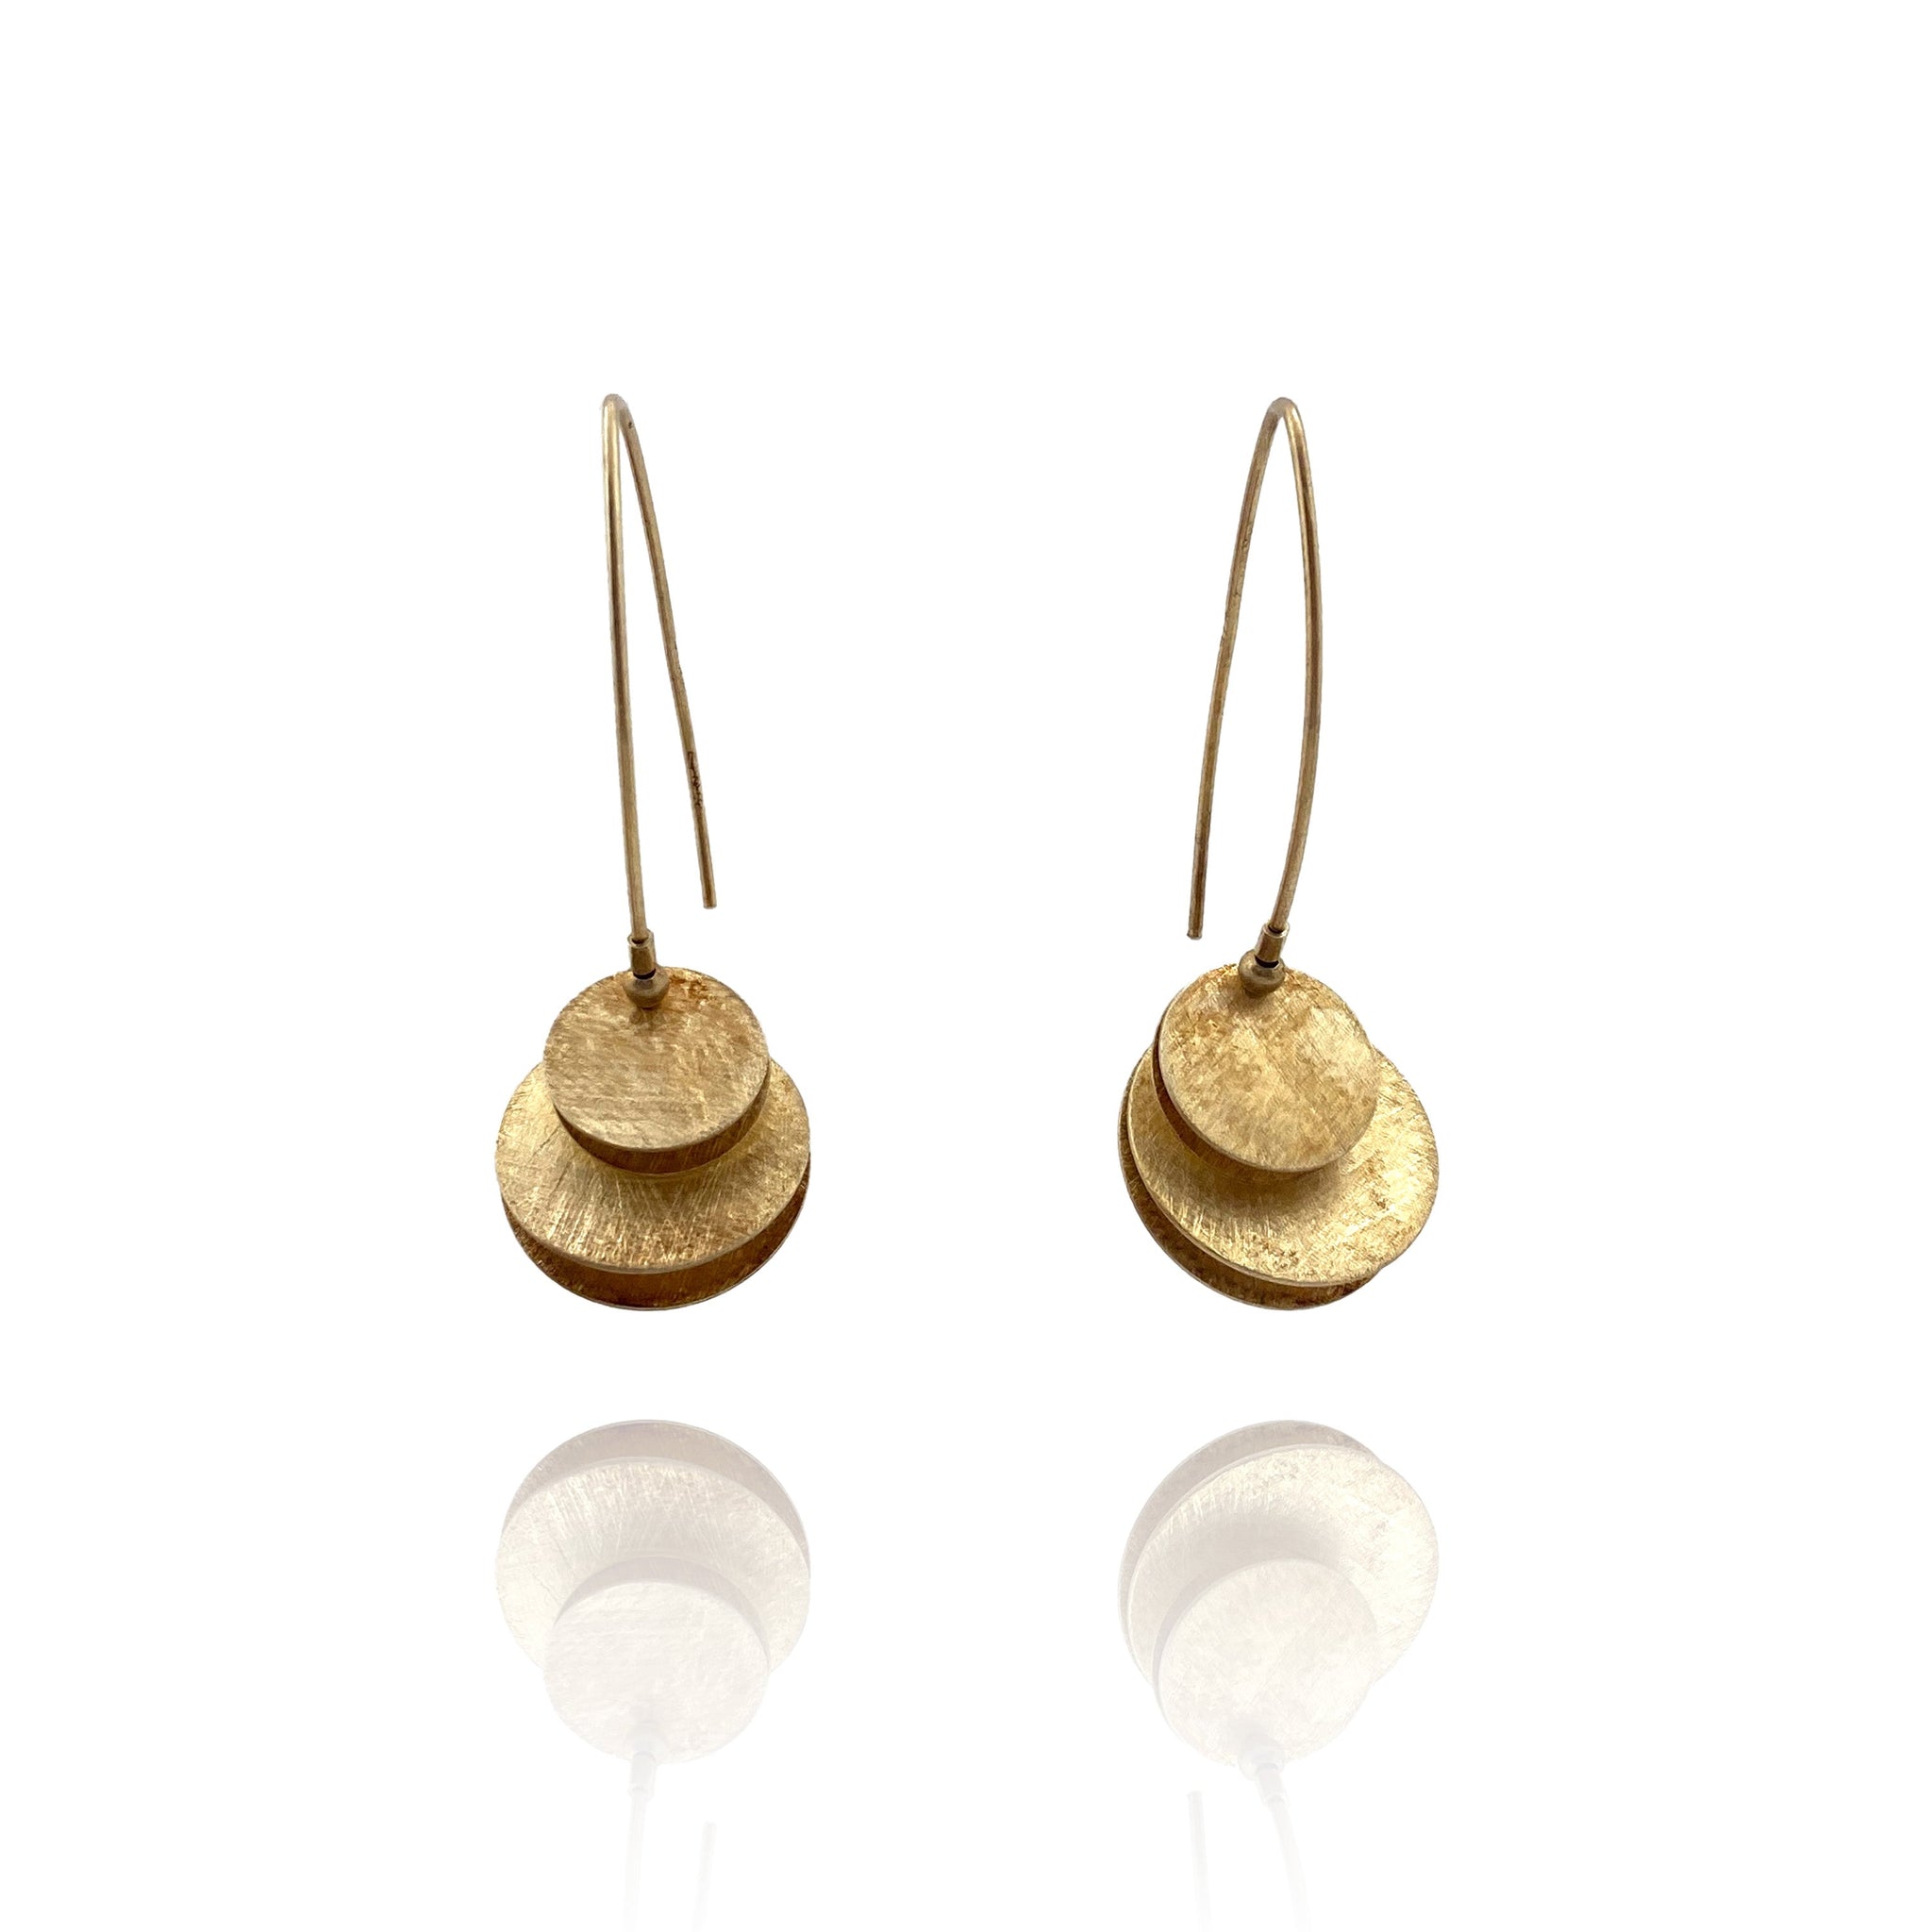 LOVISA Gold Disc w/ red,black,gold color earrings Get 5 for $17.99